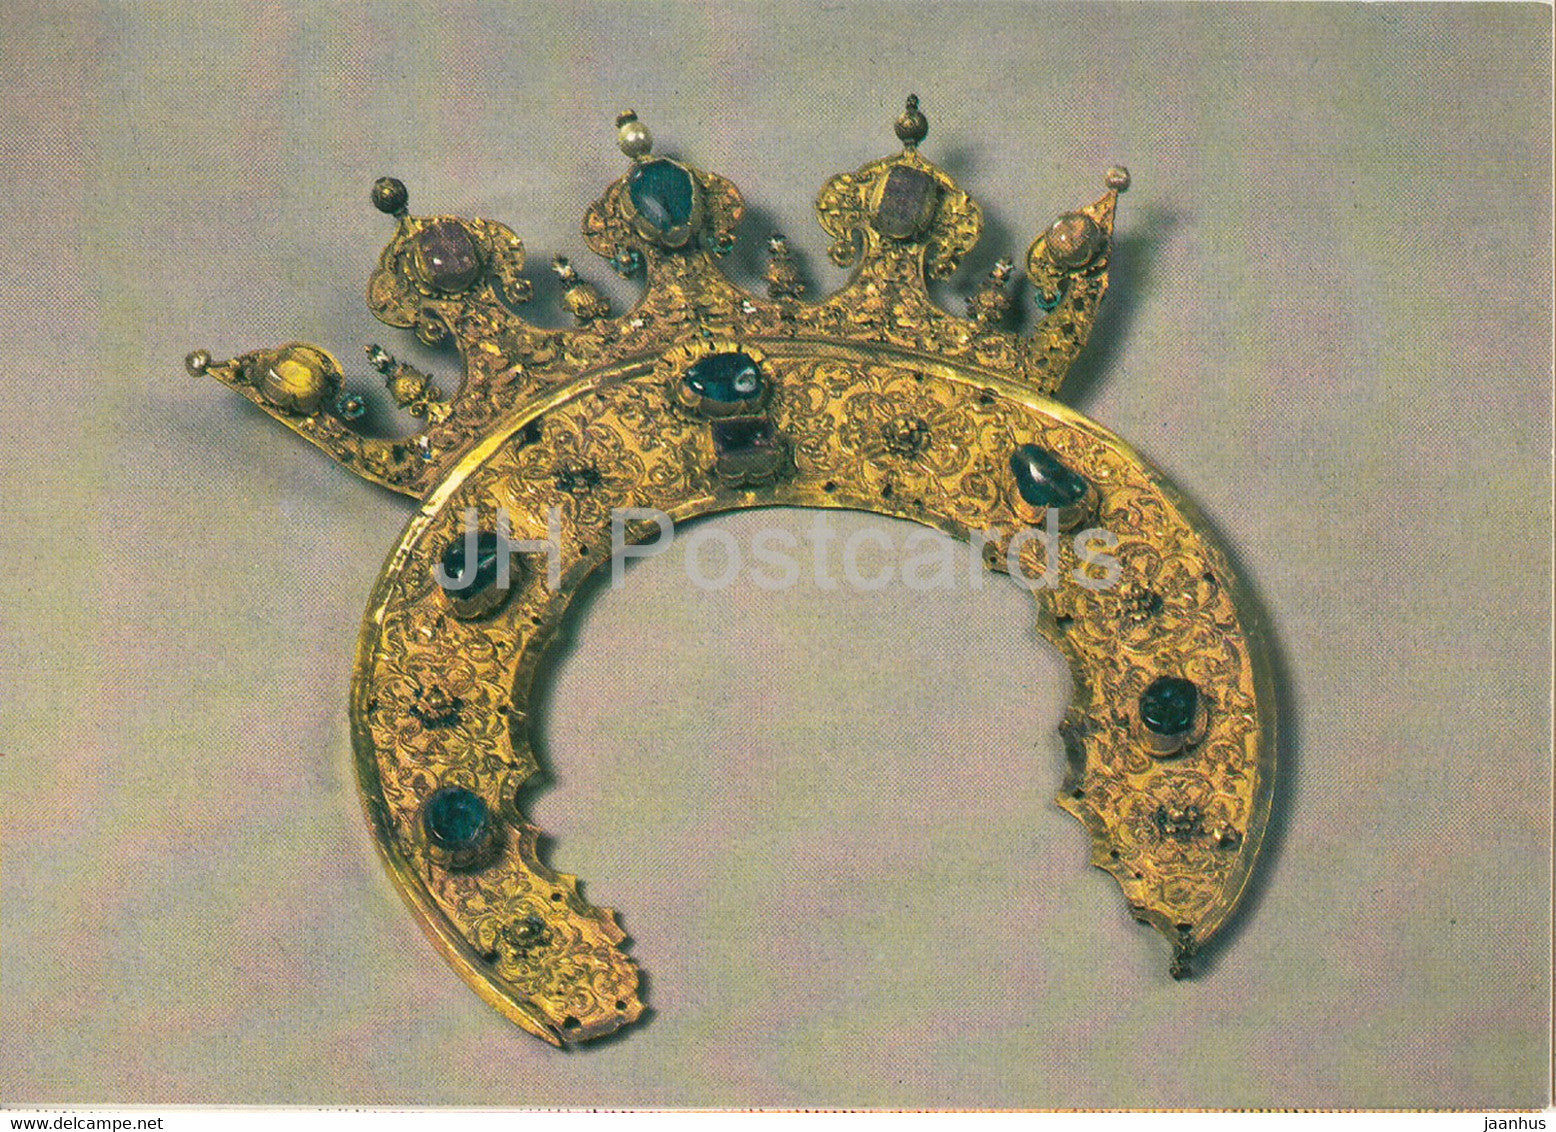 Gold and Silverwork in old Russia - Diadem, 16th century - 1983 - Russia - USSR - used - JH Postcards